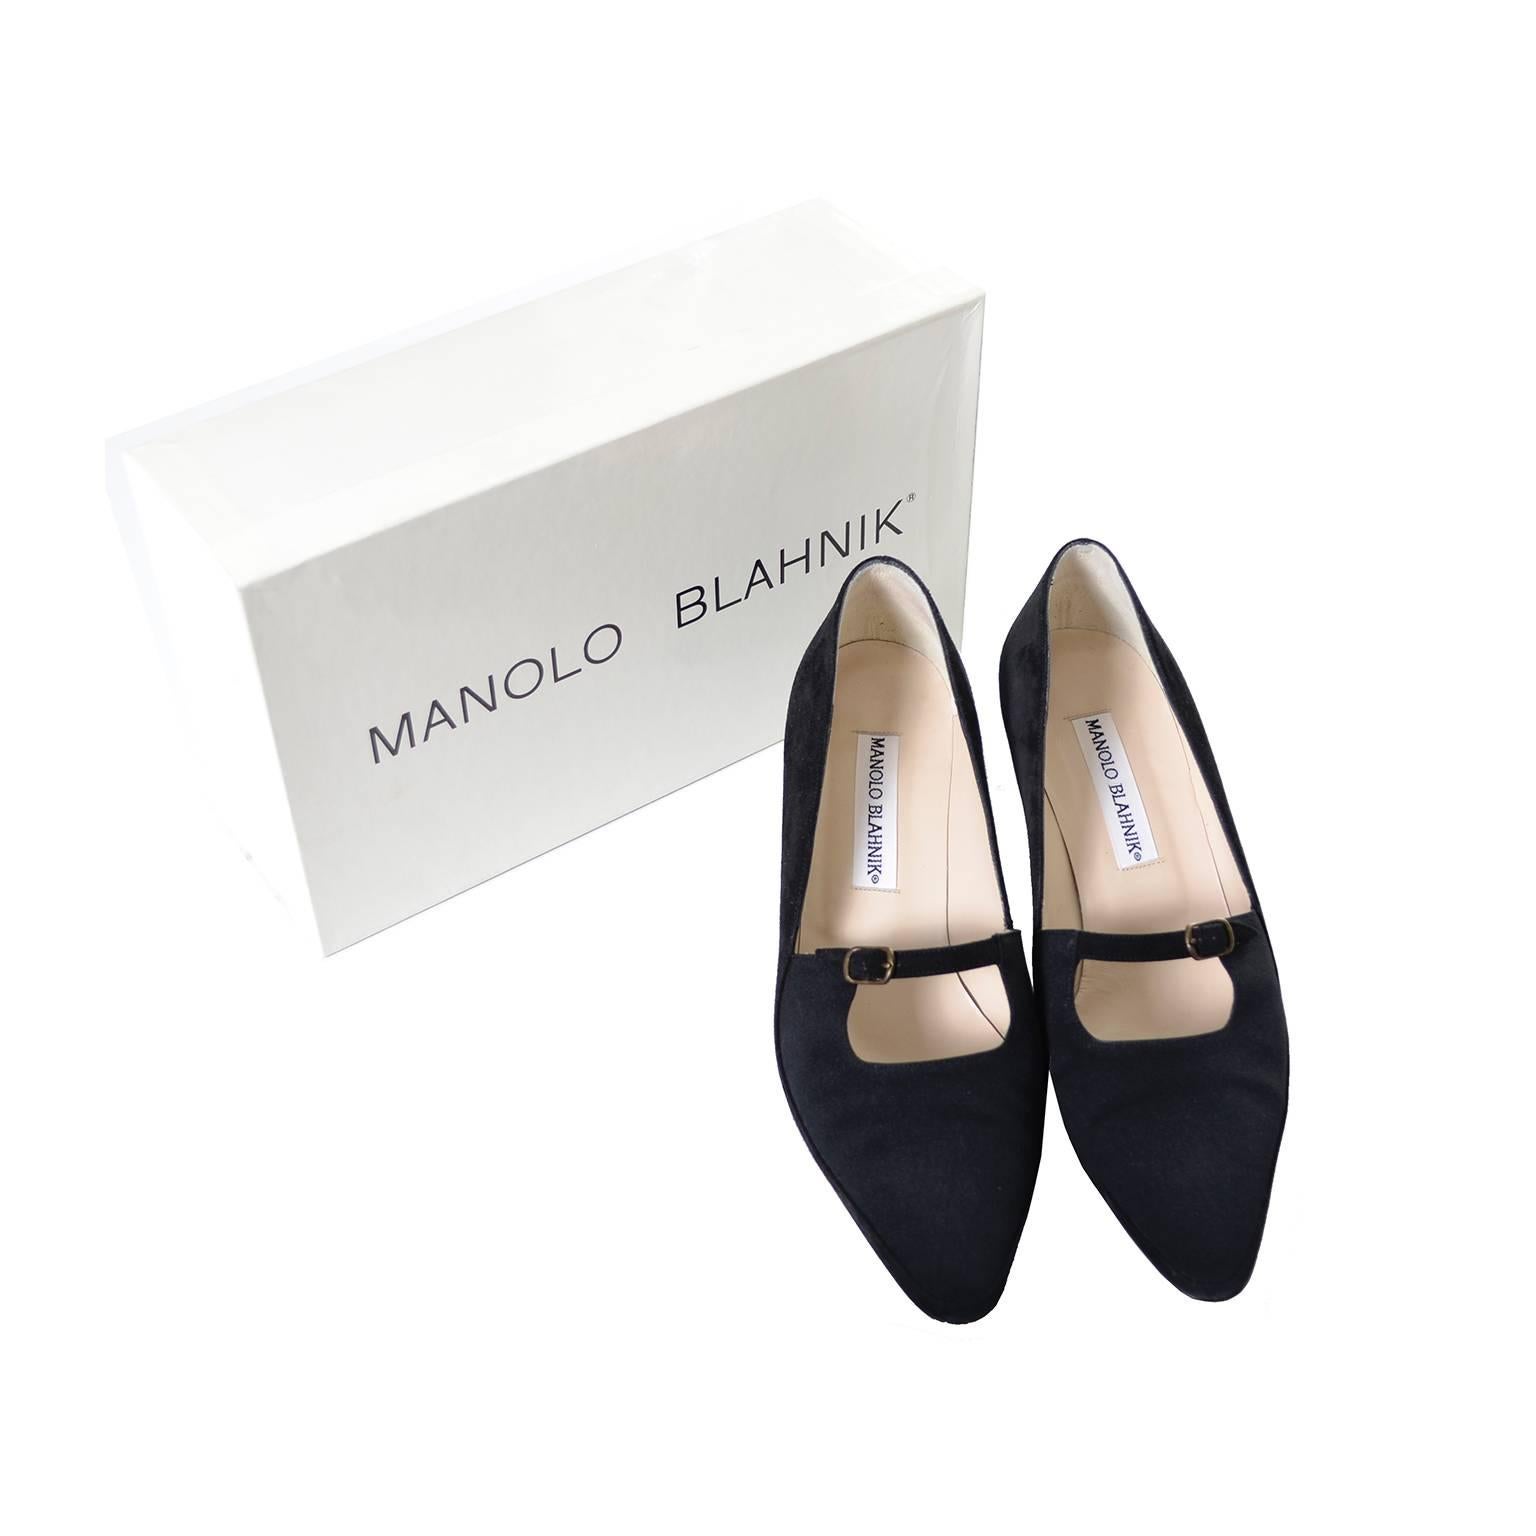 These black suede Manolo Blahnik shoes were only worn once and come with their original box.  These Mary Jane style heels are labeled a size 7.5 and were made in Italy.  They are 3 inches wide at the outside of the sole and have 2 inch kitten heels.